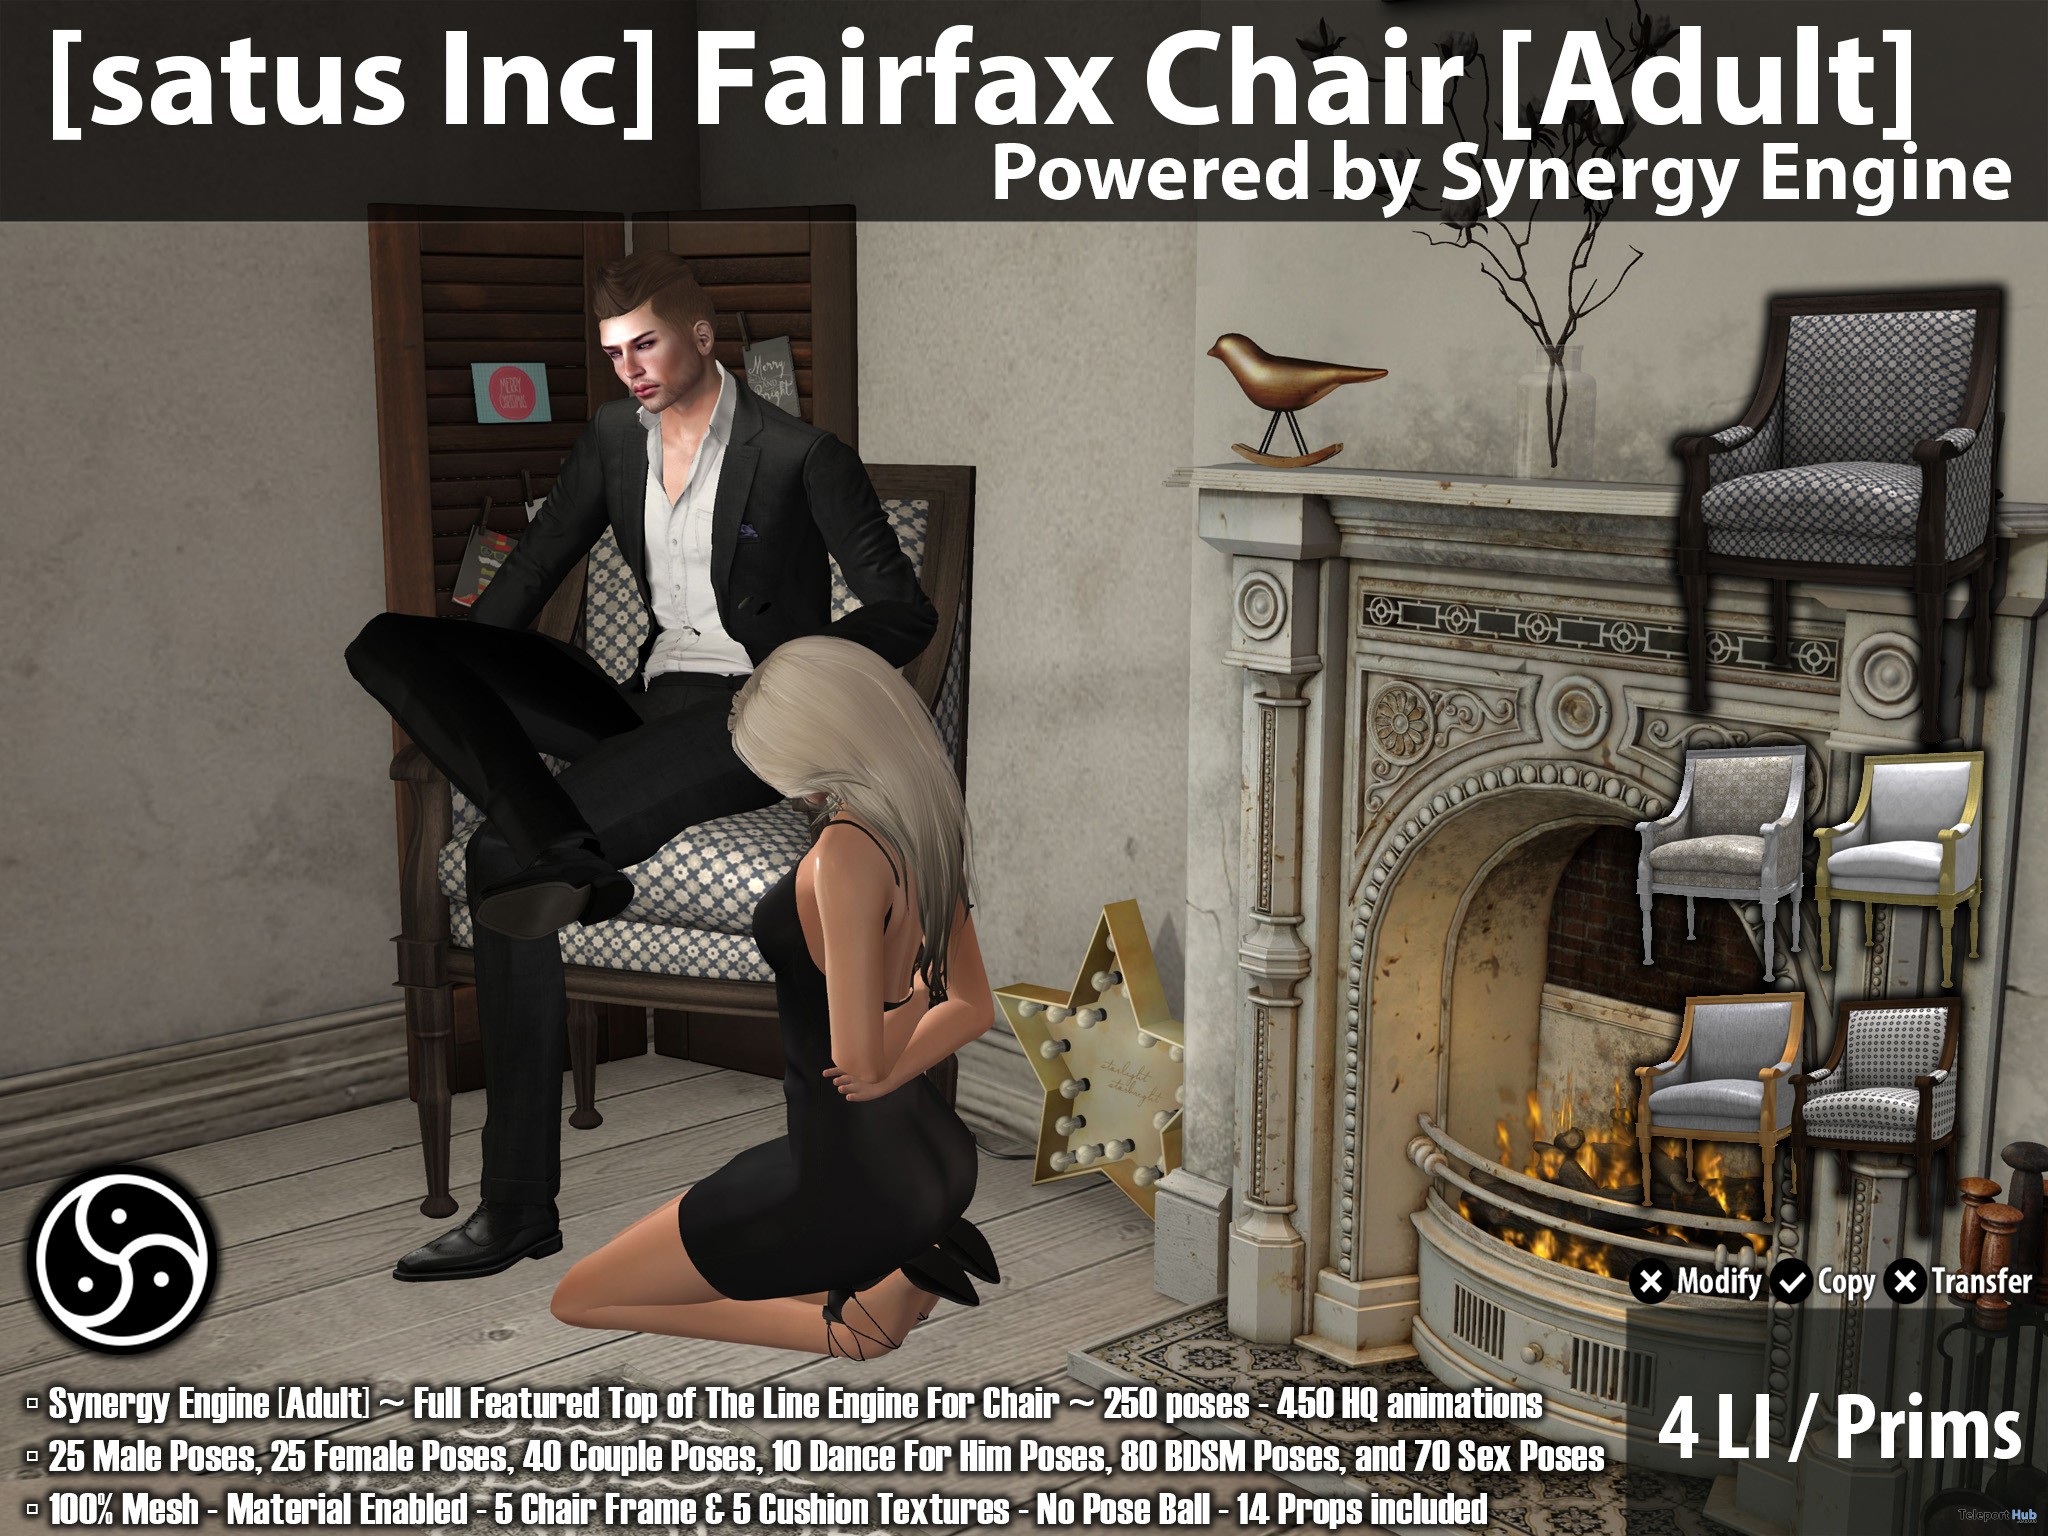 New Release: Fairfax Chair [Adult] & [PG] by [satus Inc] - Teleport Hub - teleporthub.com